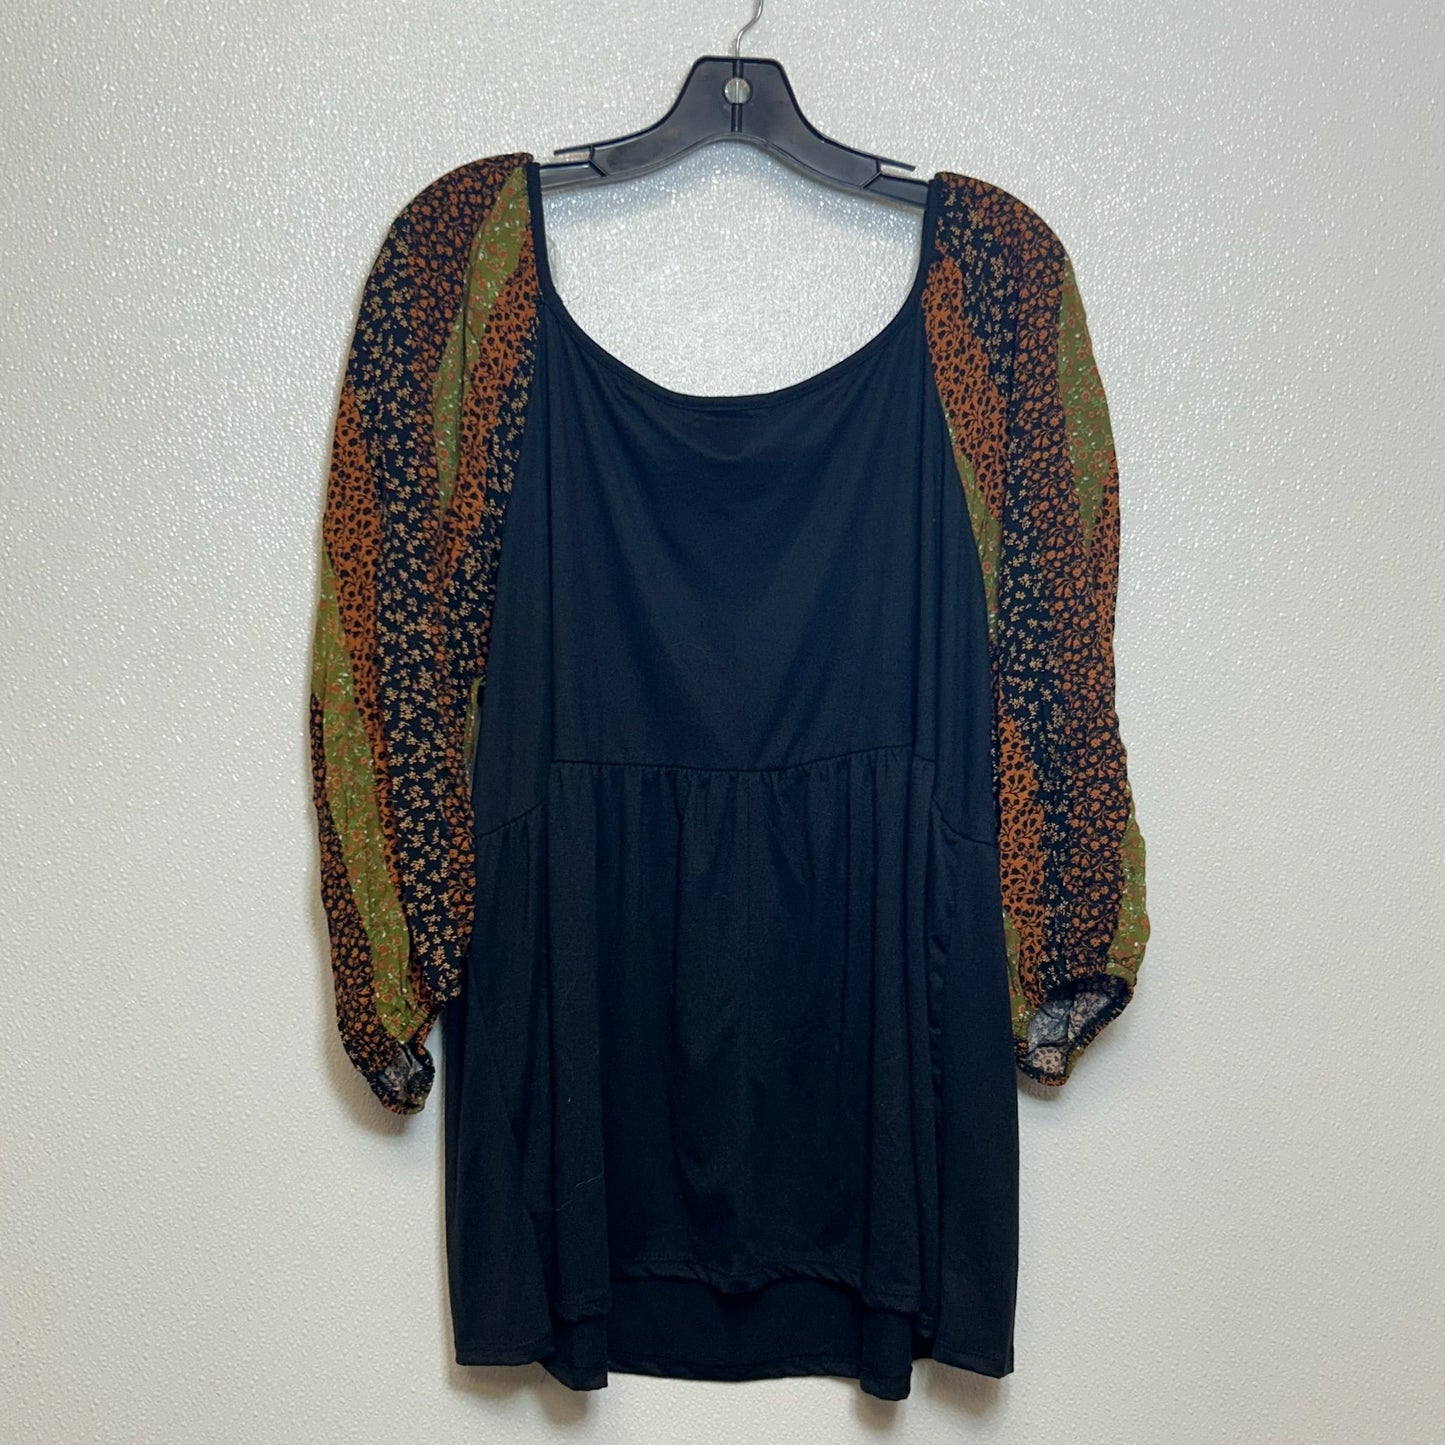 Black Top 3/4 Sleeve Clothes Mentor, Size 2x